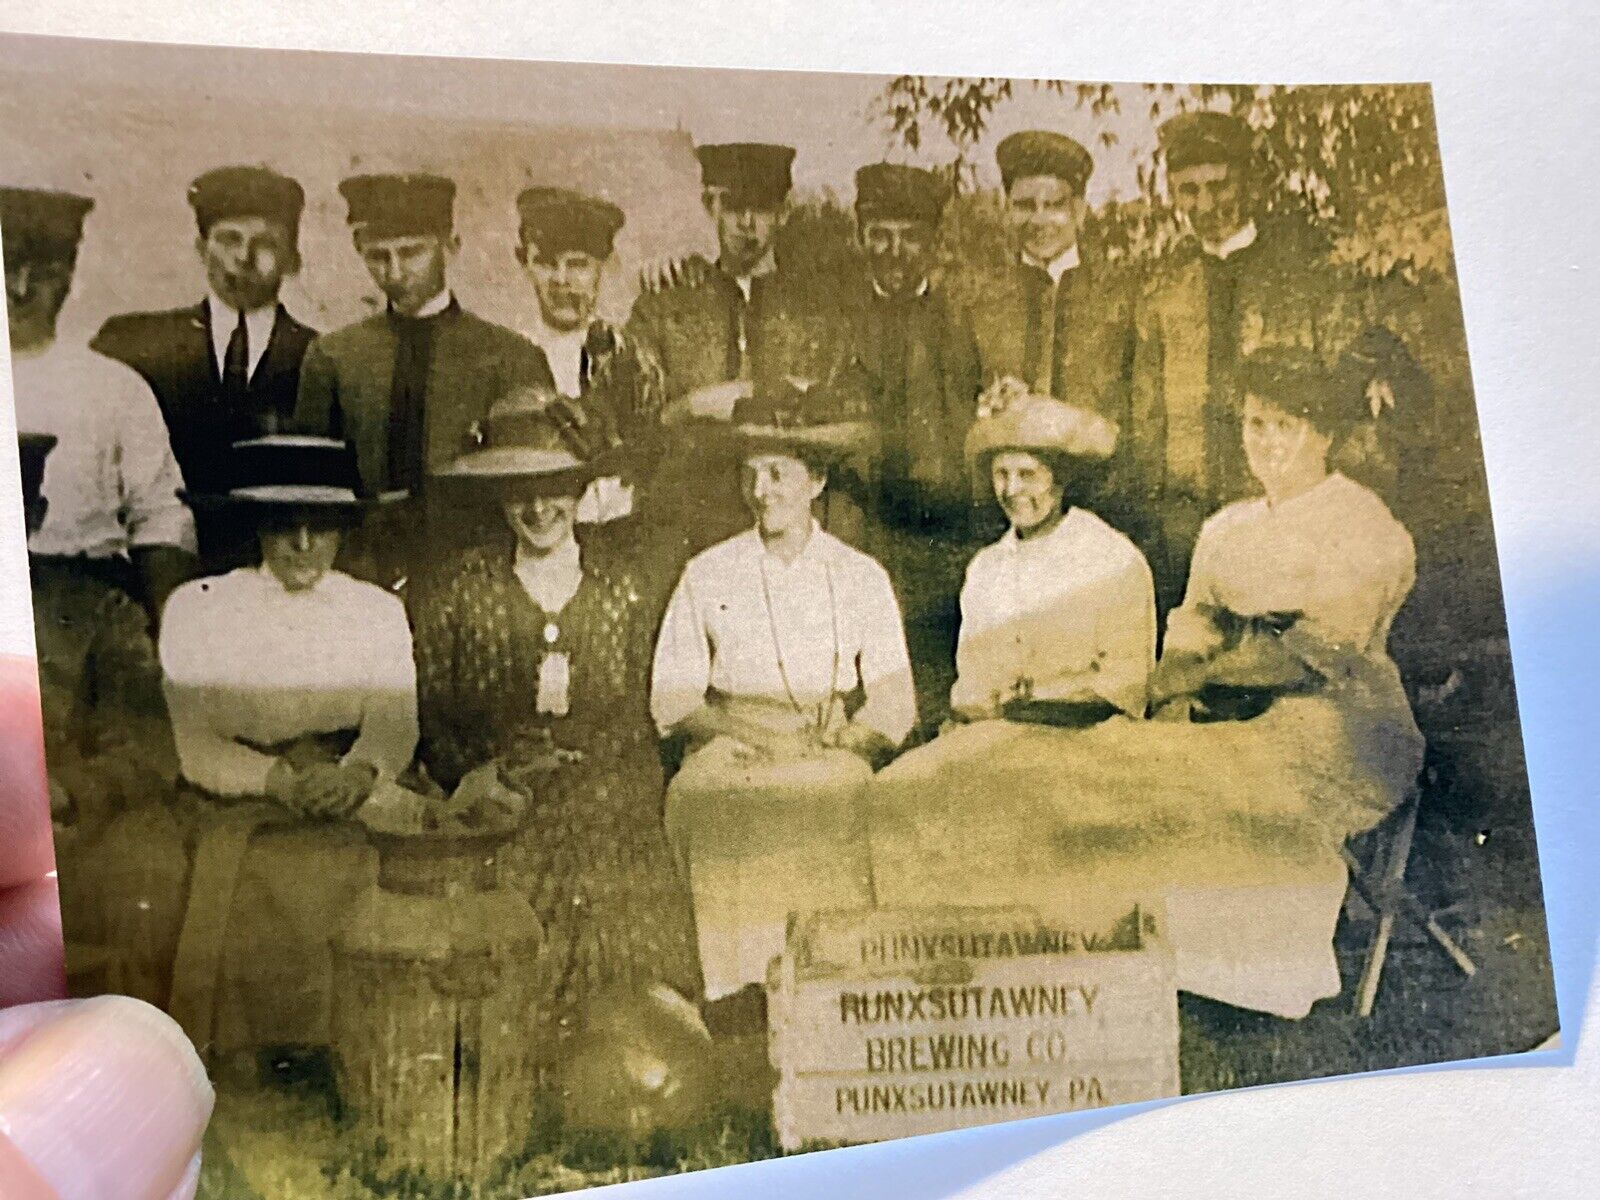 EARLY PUNXSUTAWNEY PA BREWING CO LADIES FIREMEN WITH WOOD BEER CASE NEW POSTCARD